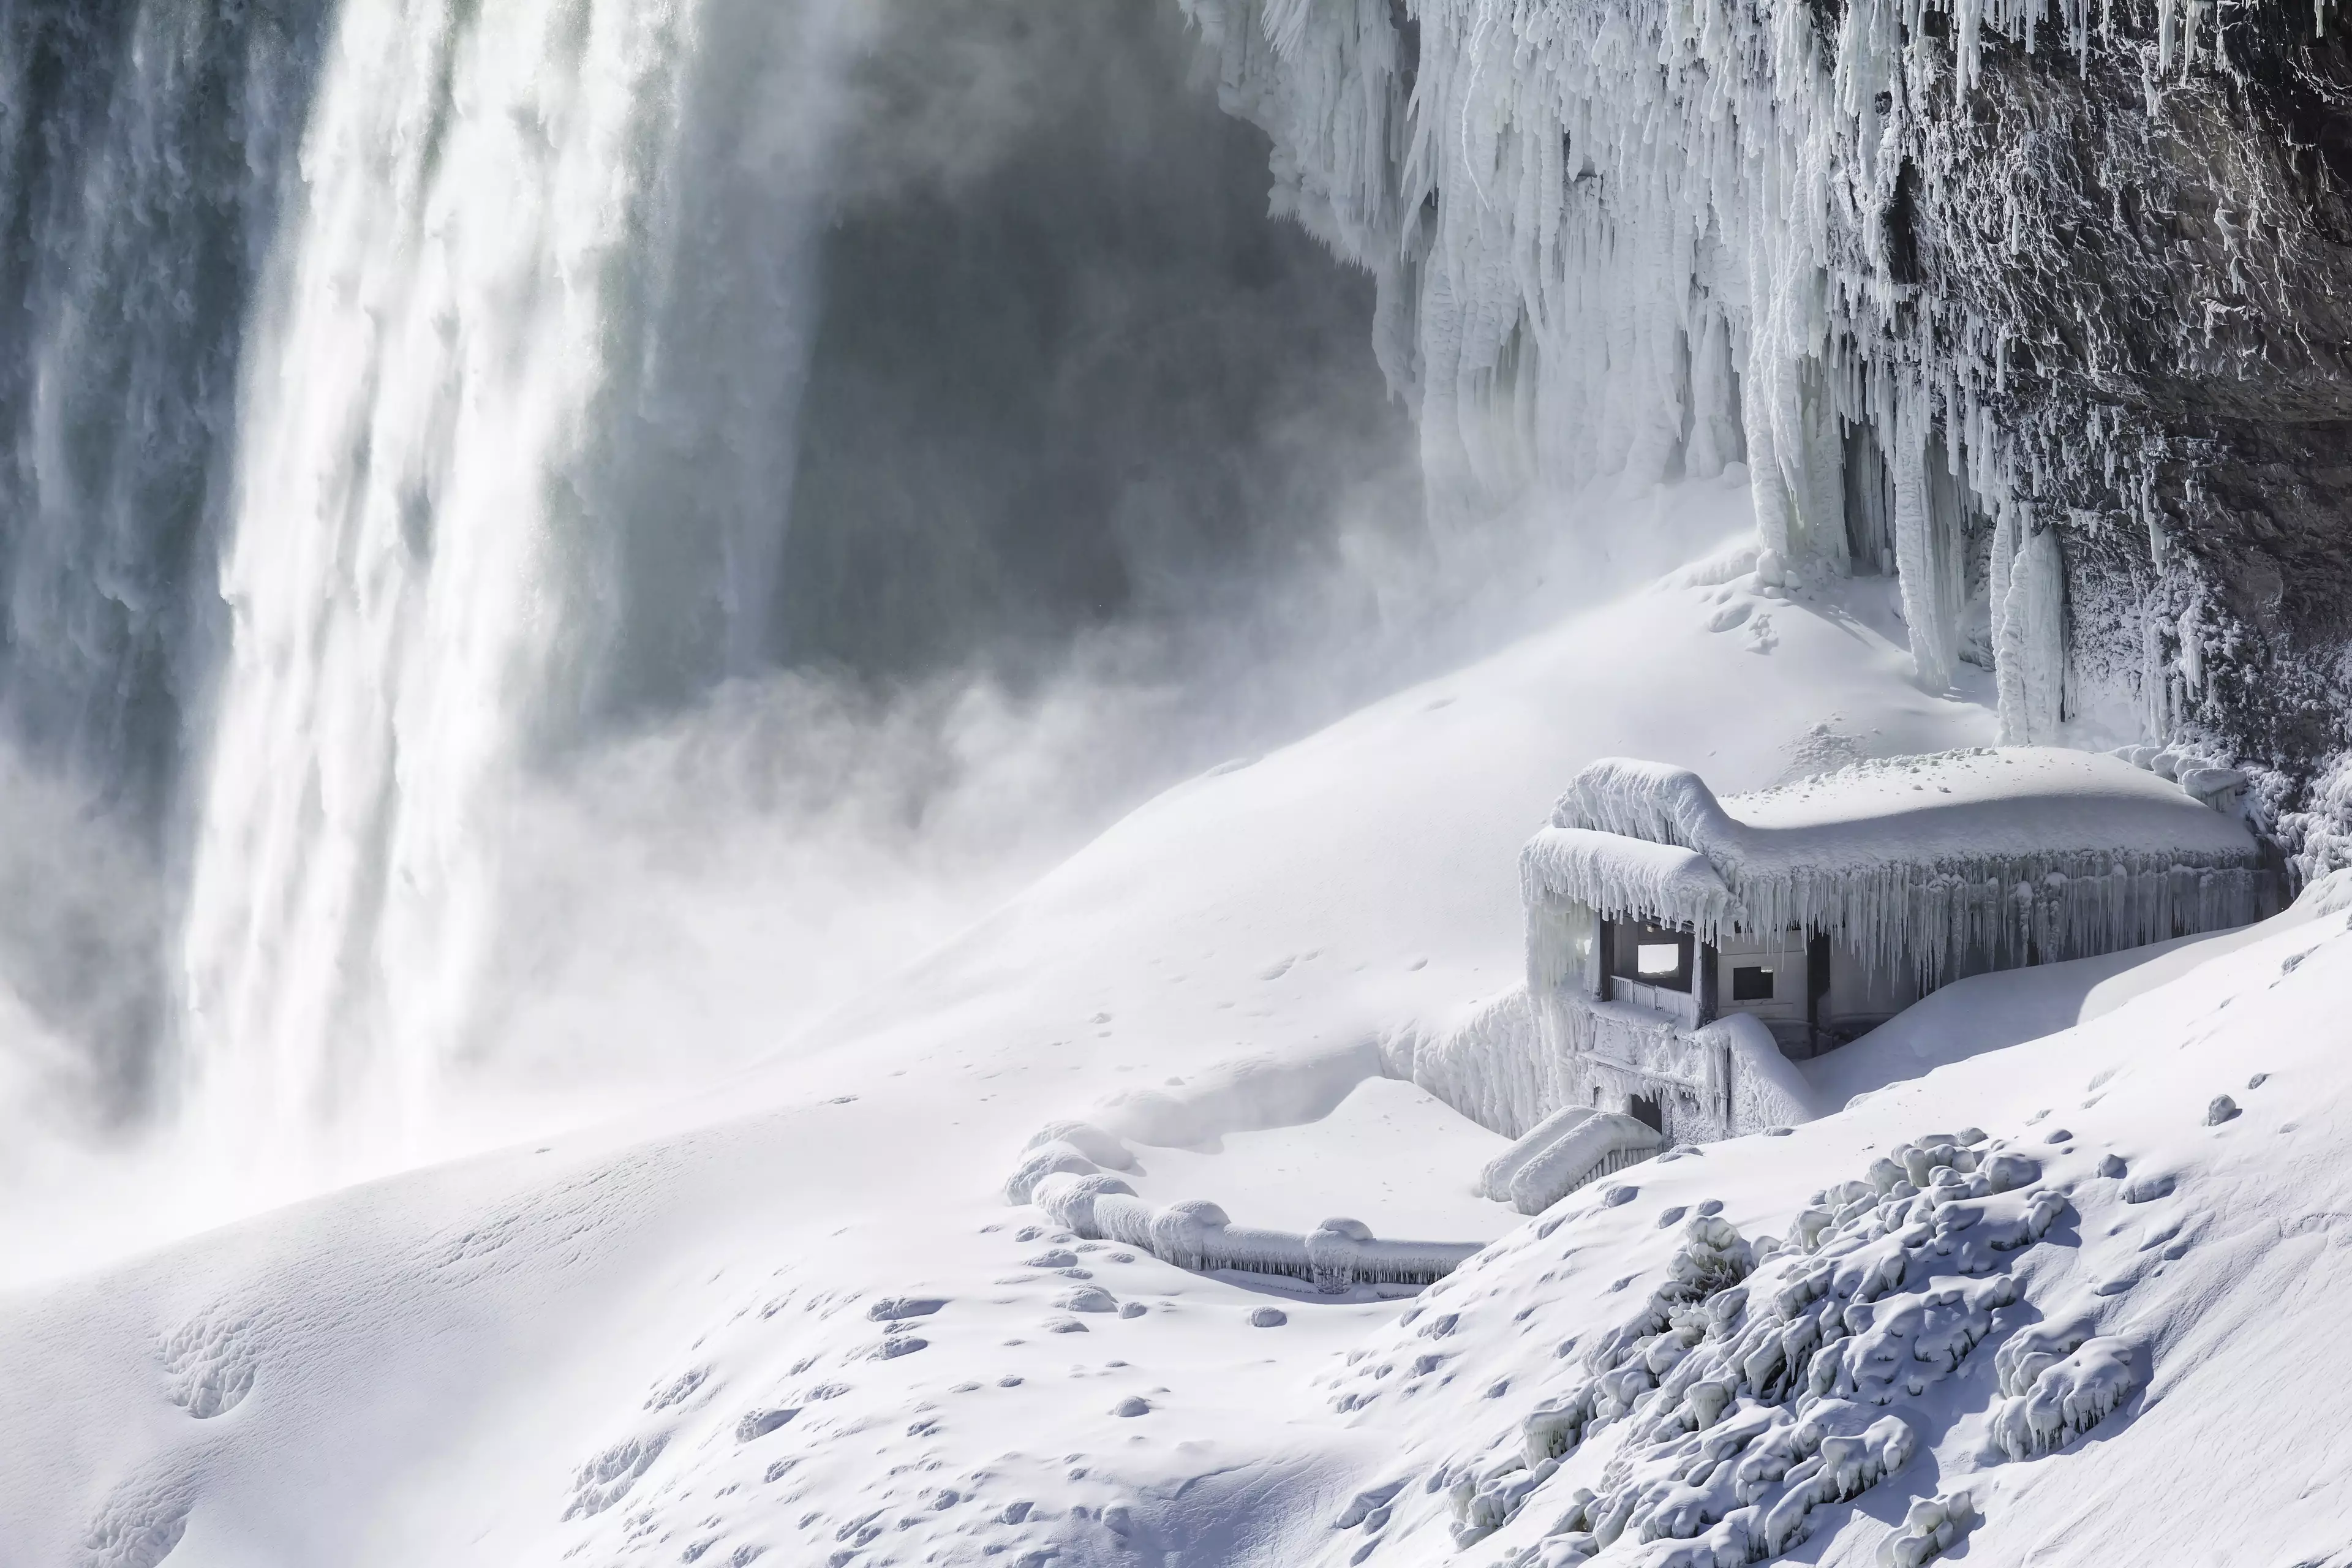 Niagara Falls hasn't been as cold as some places, but cold enough.